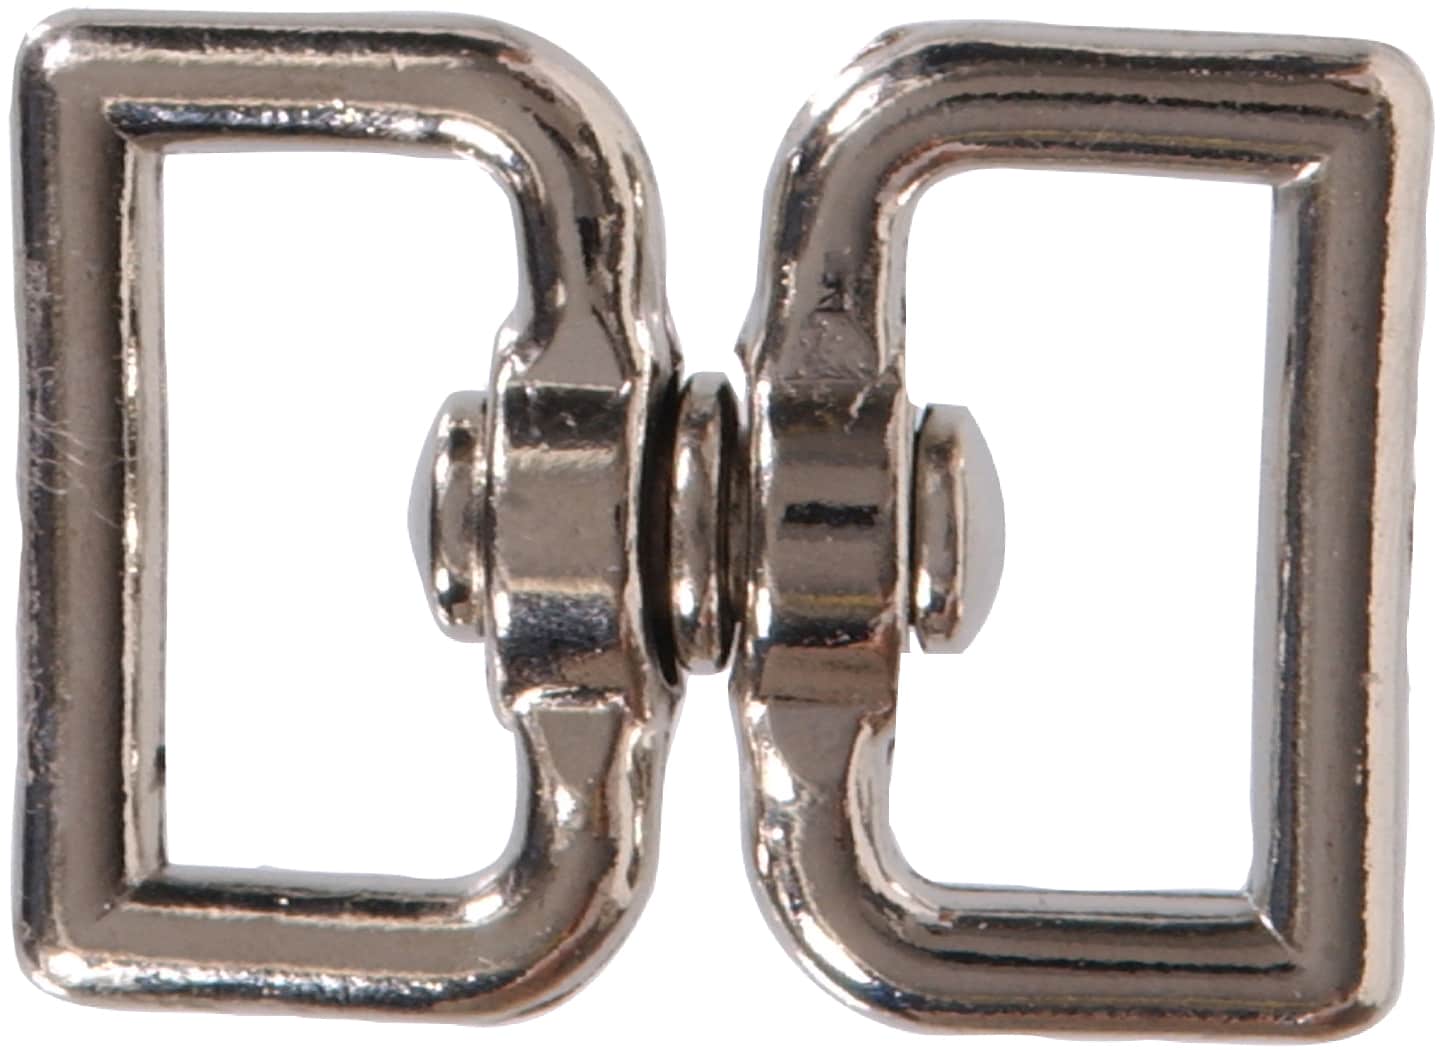 Hillman 1-in x 2-in Nickel Plated Double Strap Swivel Eye in the Chain  Accessories department at